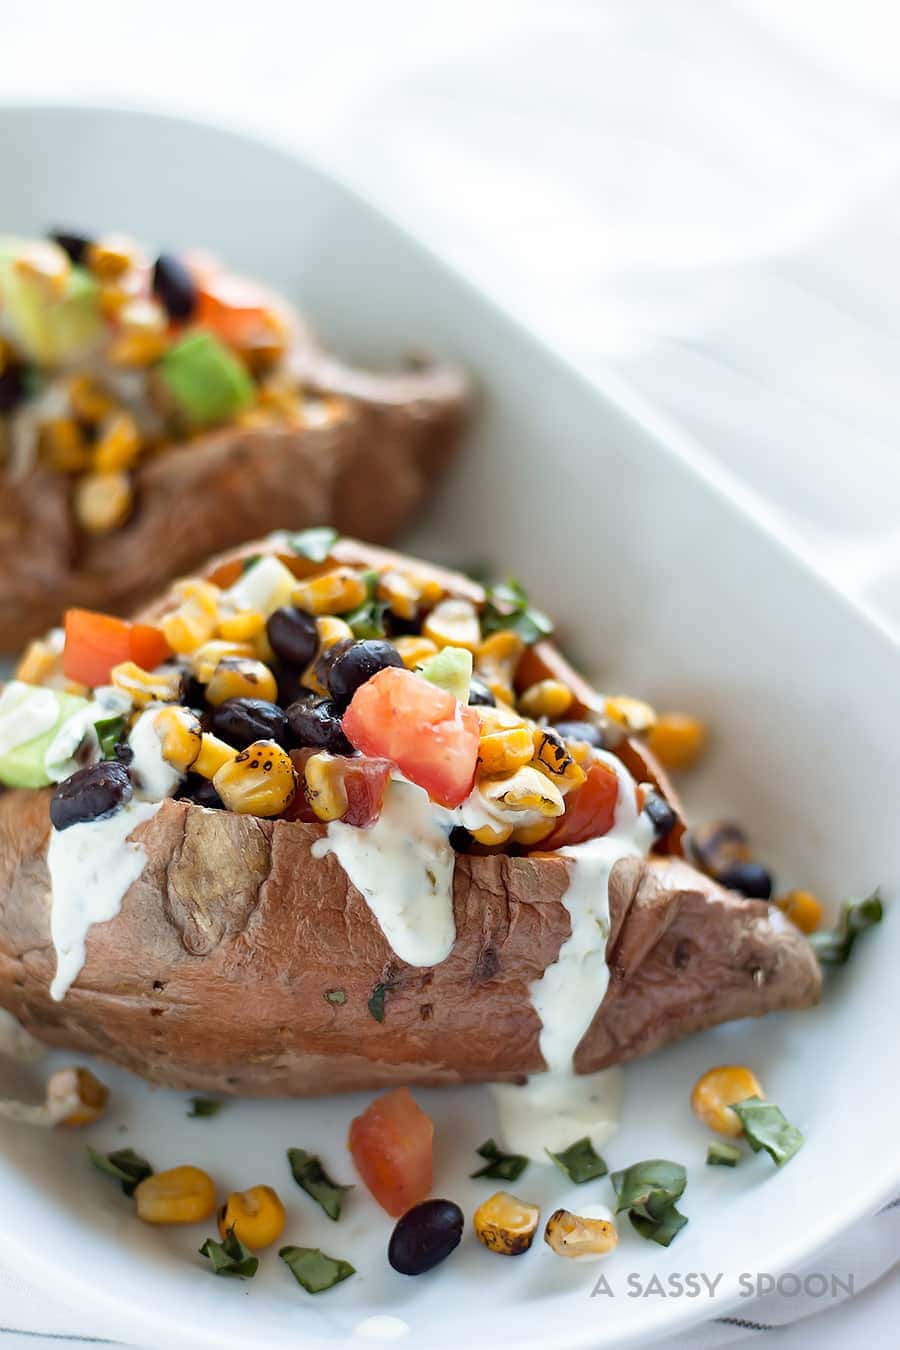 Baked Vegetarian Stuffed Sweet Potatoes. Baked sweet potatoes loaded with roasted corn, black beans, chopped tomatoes, diced onions, and avocado result in a meatless, flavorful and easy 20-minute meal for busy weeknights!